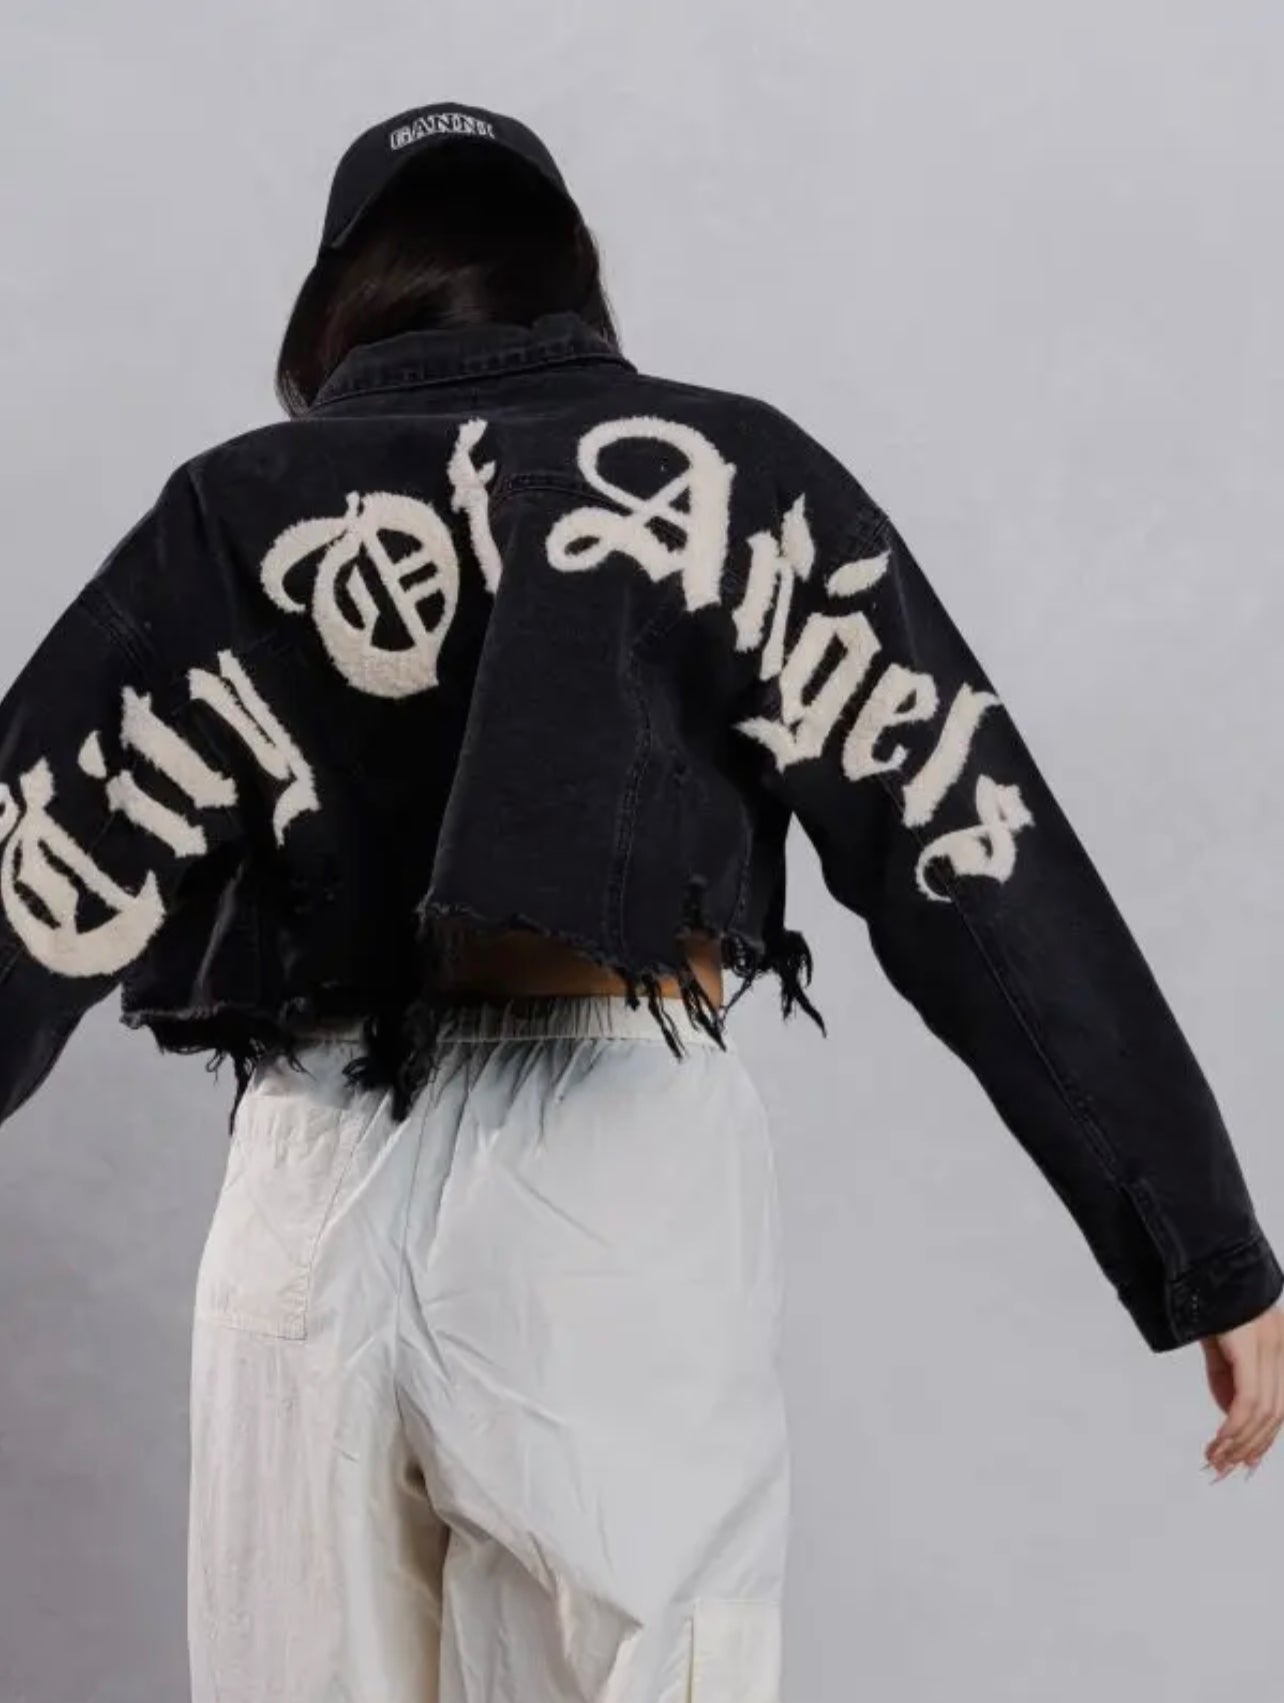 City Of Angels Cropped Jean Jacket